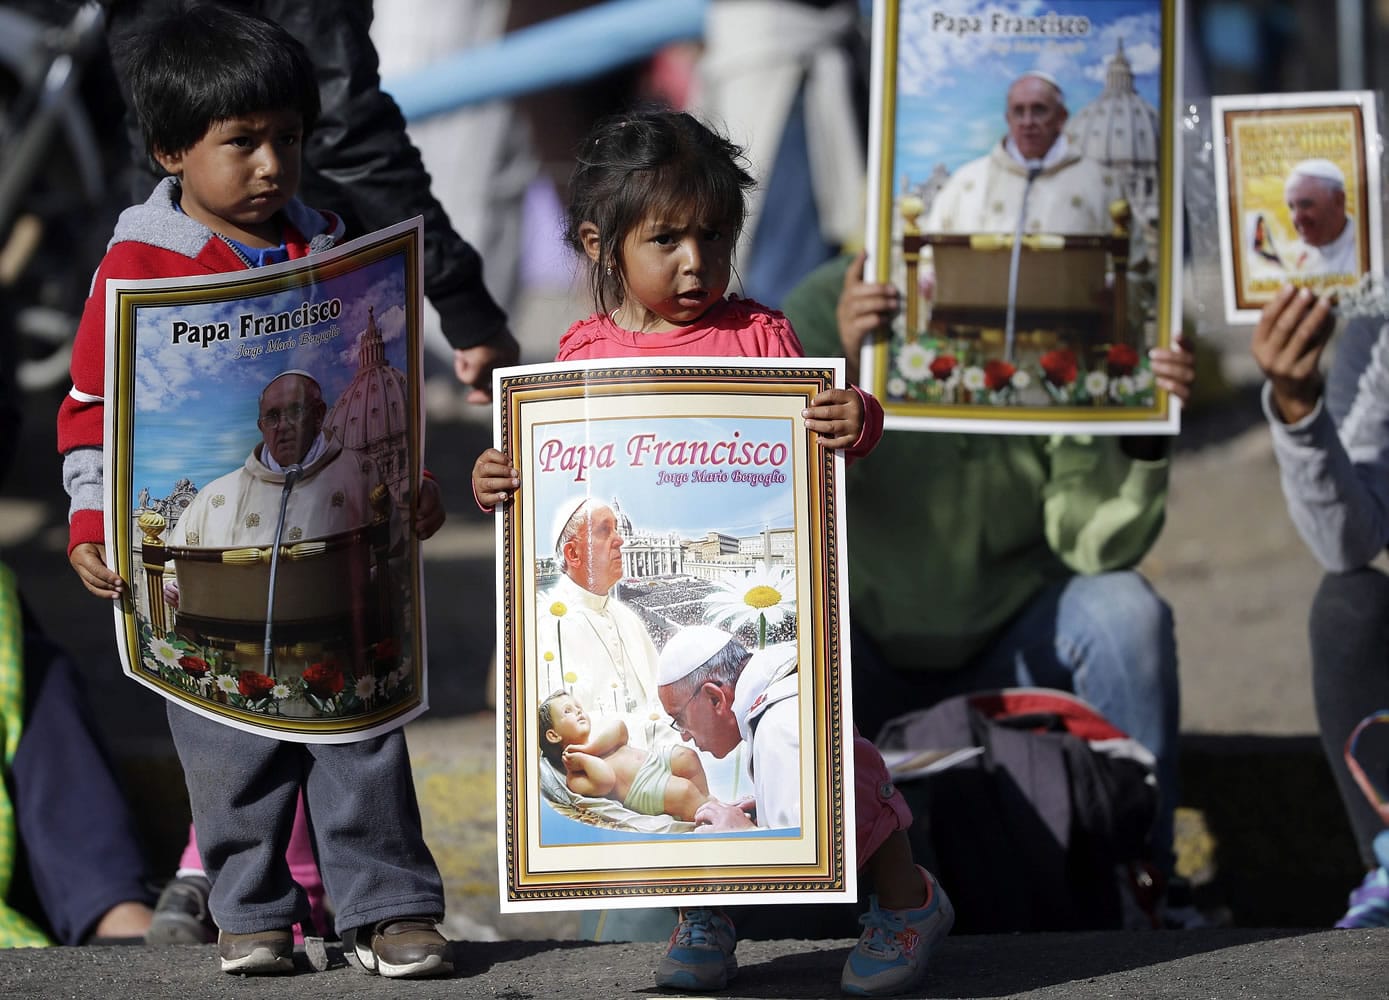 Children holding posters wait for the arrival of Pope Francis at the Sanctuary of El Quinche, in El Quinche, Ecuador, on Wednesday.